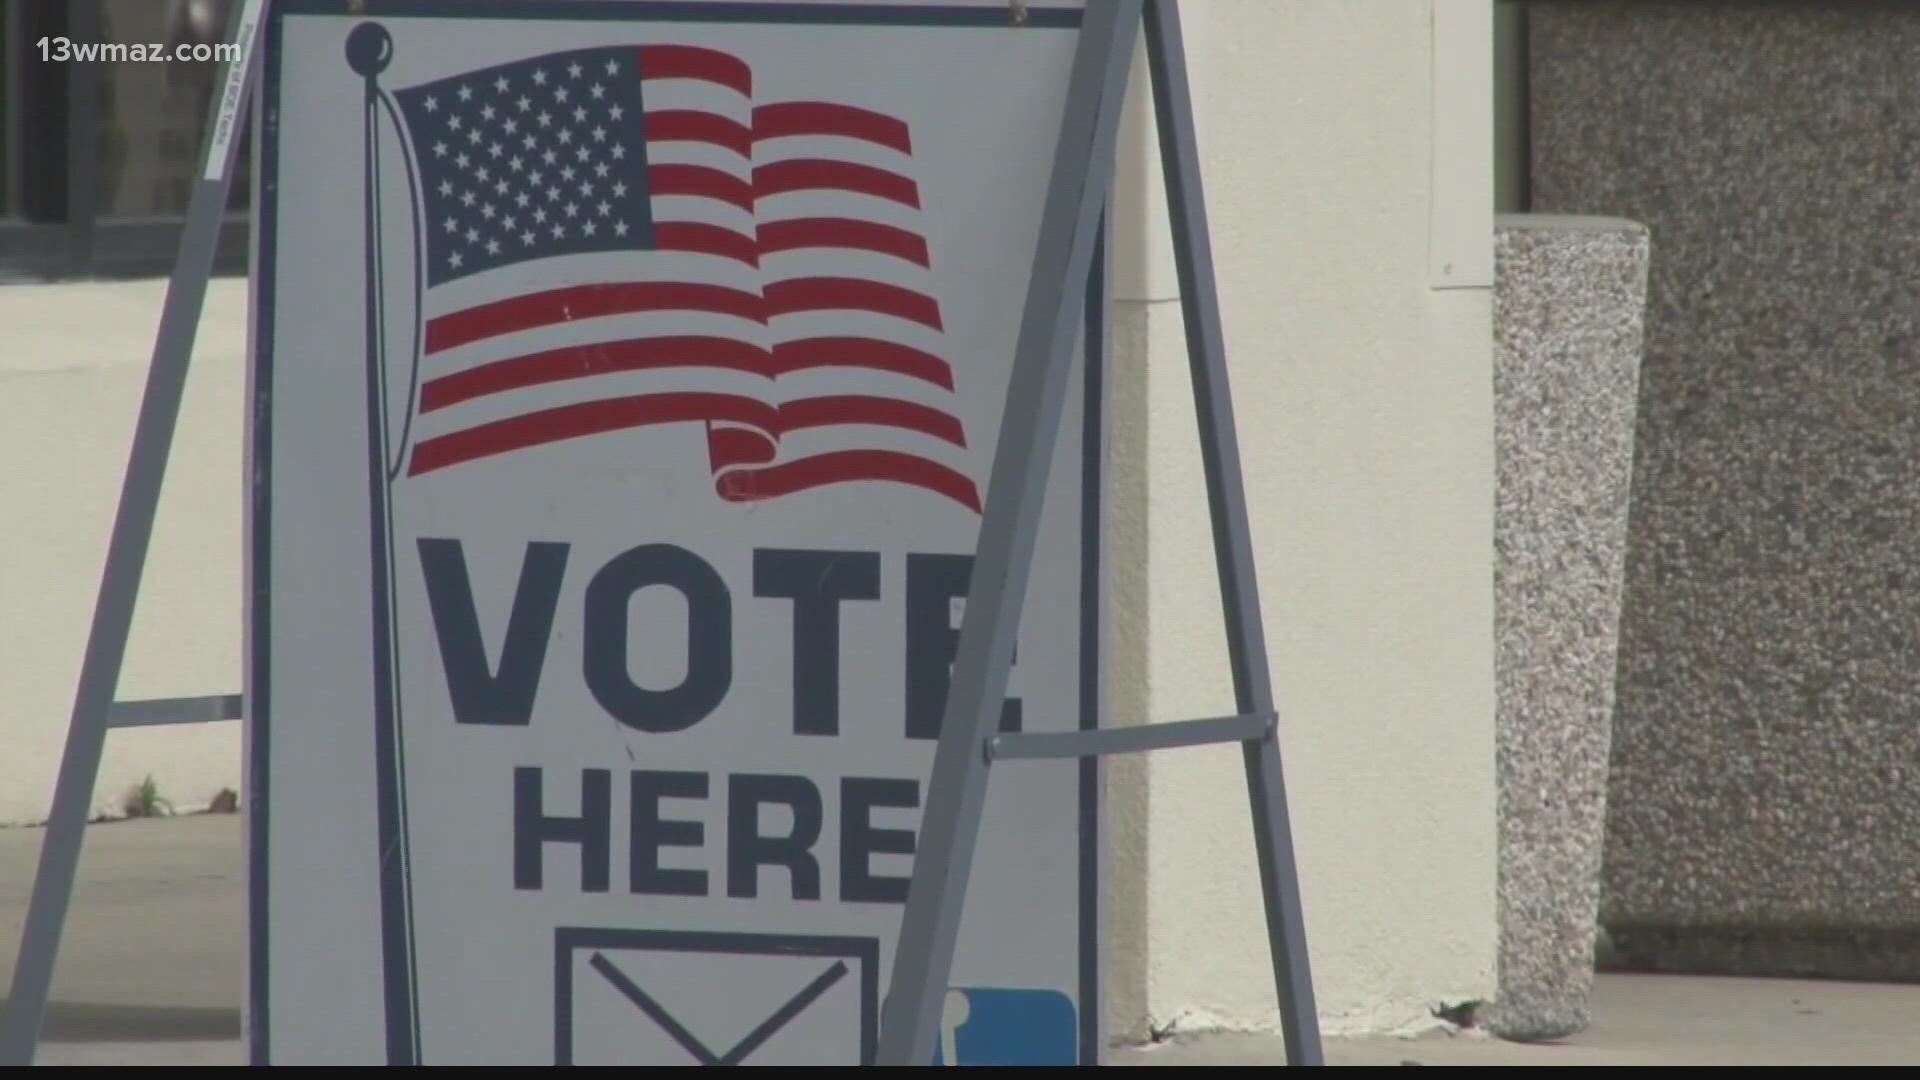 The Nov. 2 elections are just three weeks away, and now you have a chance to get out and vote. Early voting starts Tuesday in many Central Georgia cities